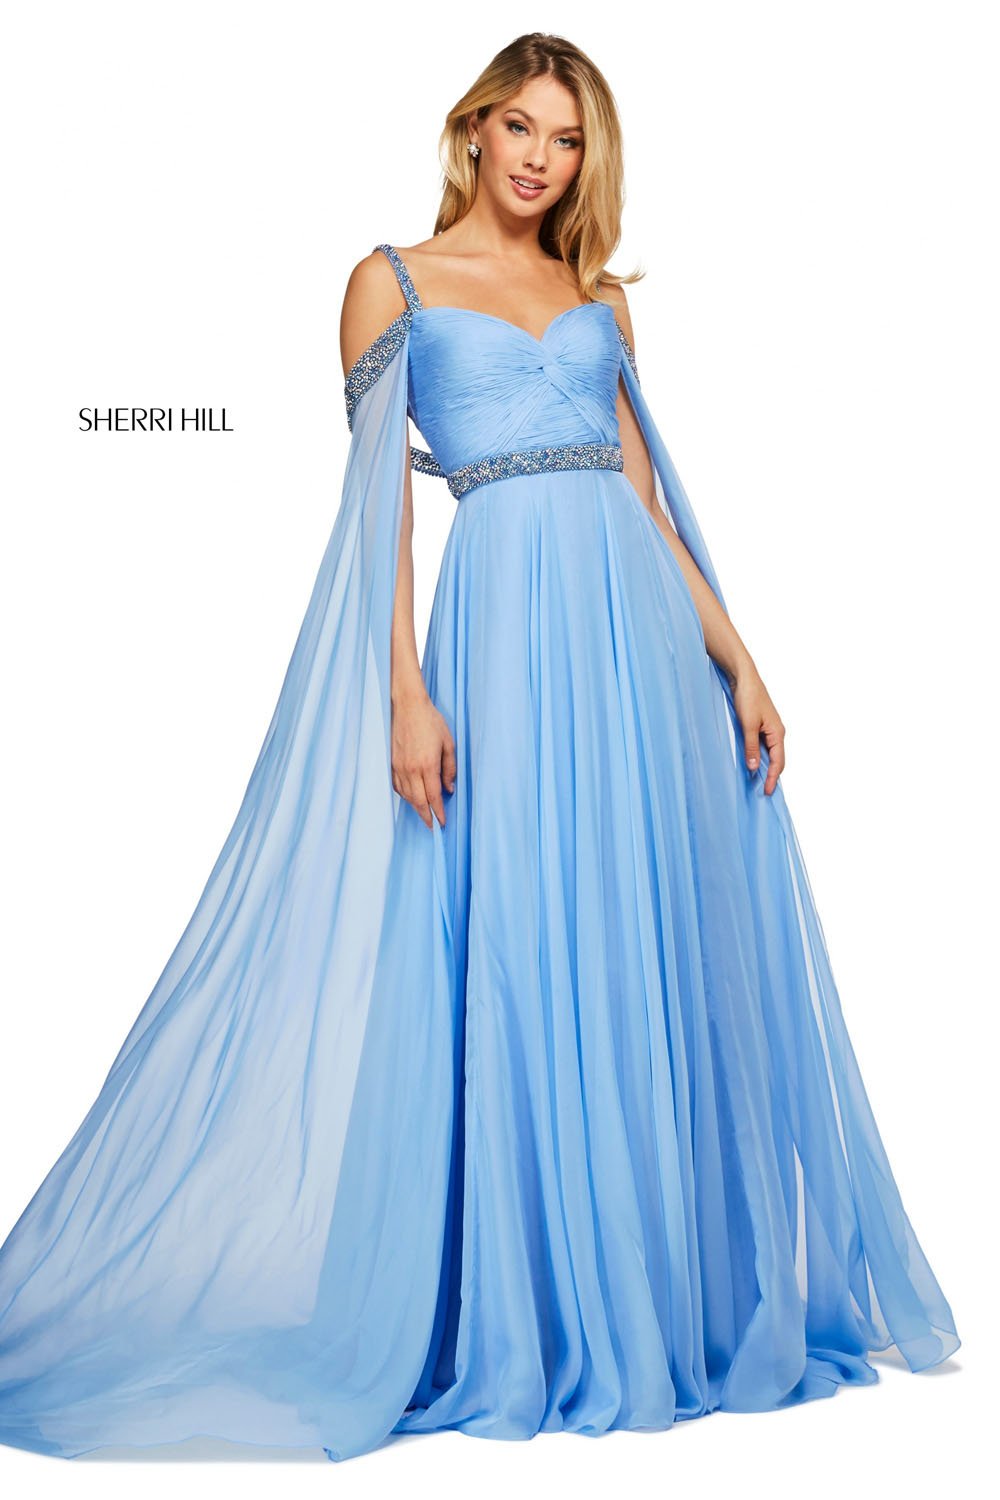 Sherri Hill 53630 dress images in these colors: Aqua, Dreamcicle, Yellow, Navy, Ivory, Light Blue, Periwinkle, Blush, Black, Candy Pink, Red, Hot Pink, Jade.